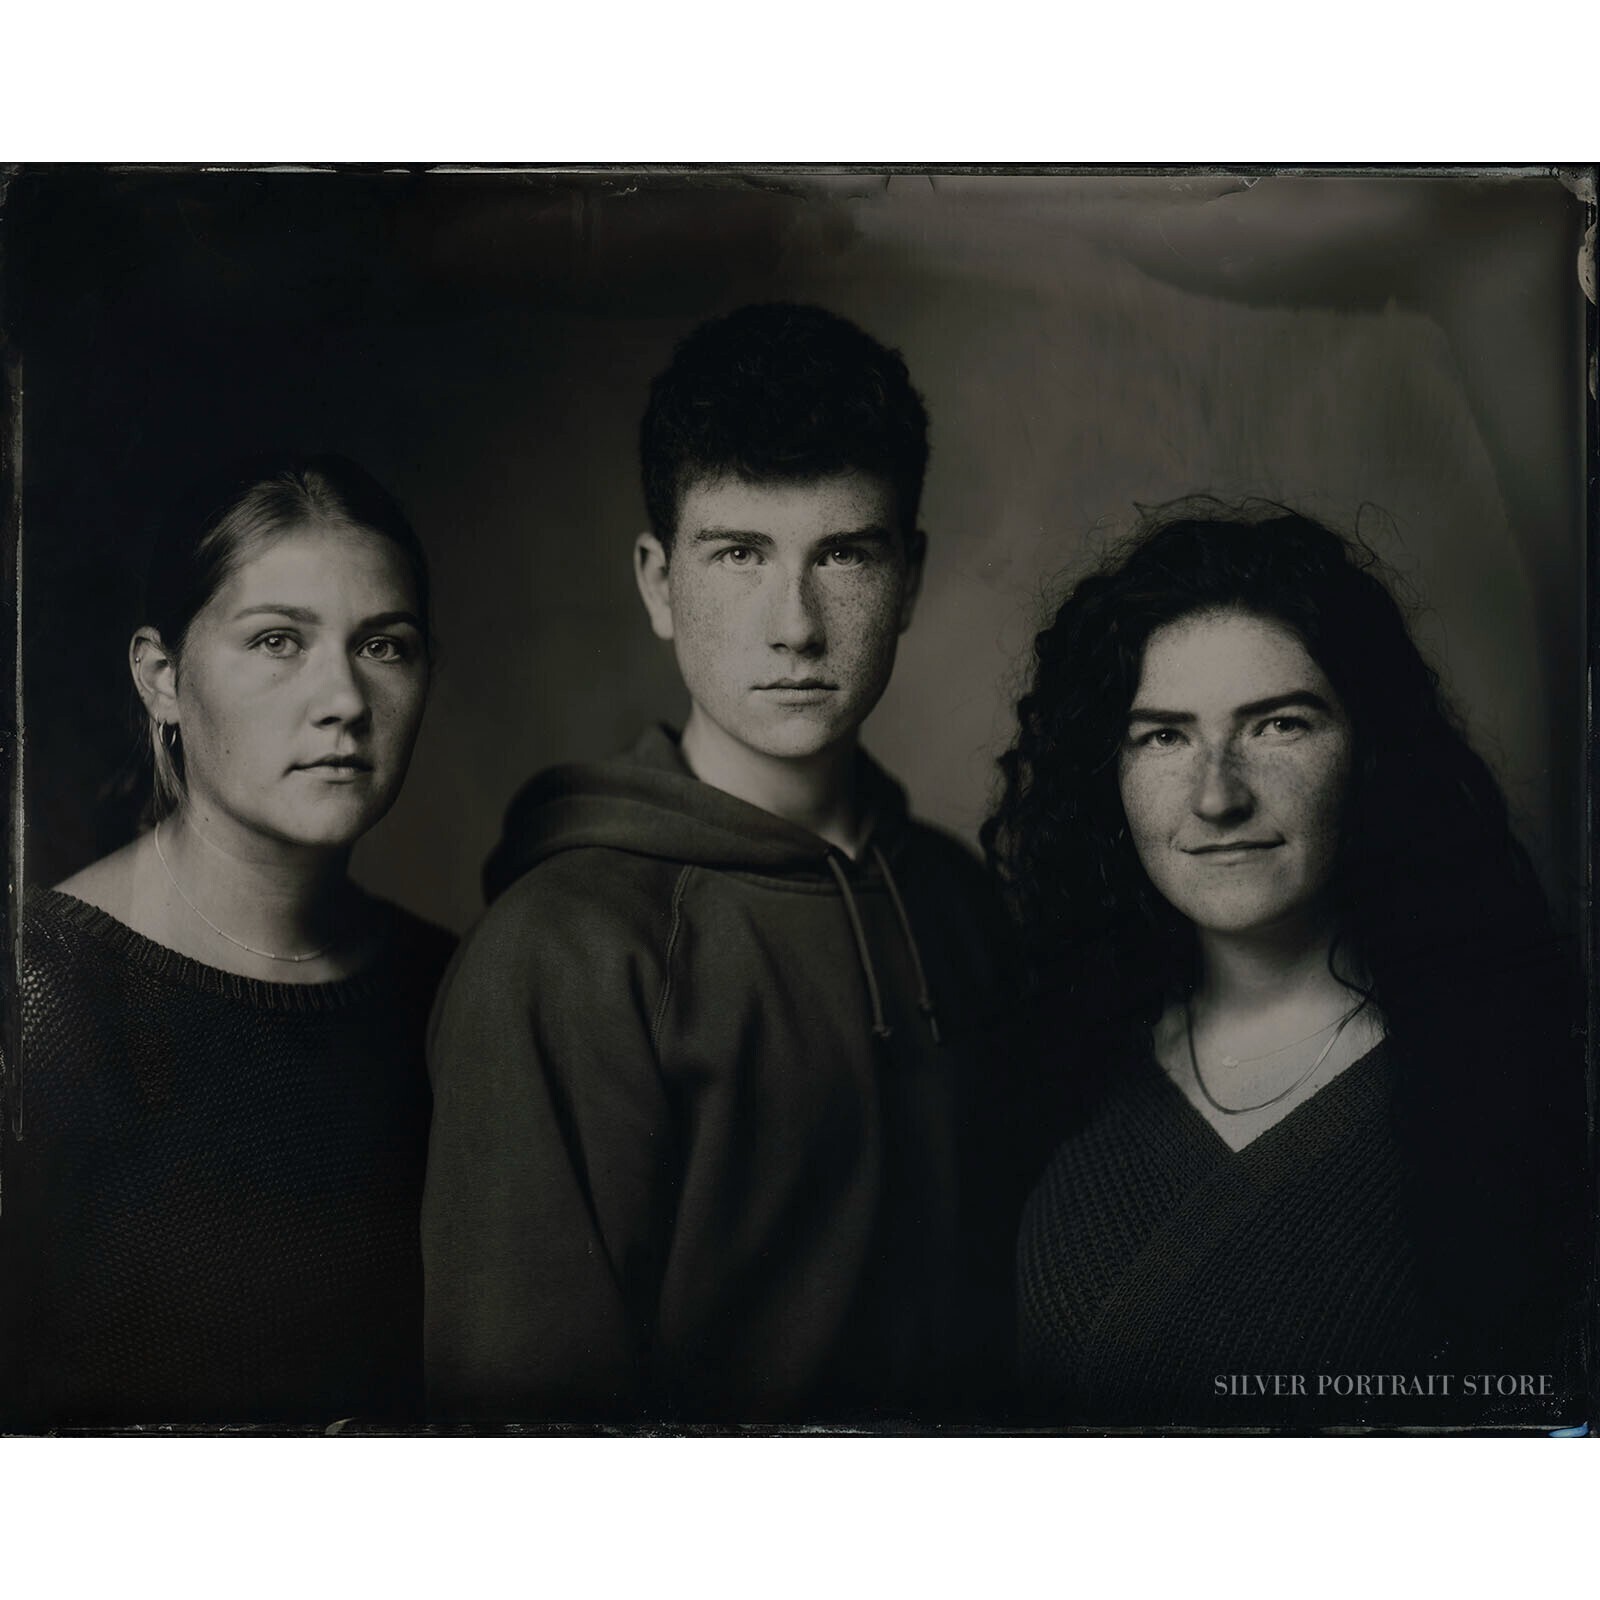 Mickey, Pieter & Anne -Silver Portrait Store-Wet plate collodion-Tintype 20 x 25 cm.